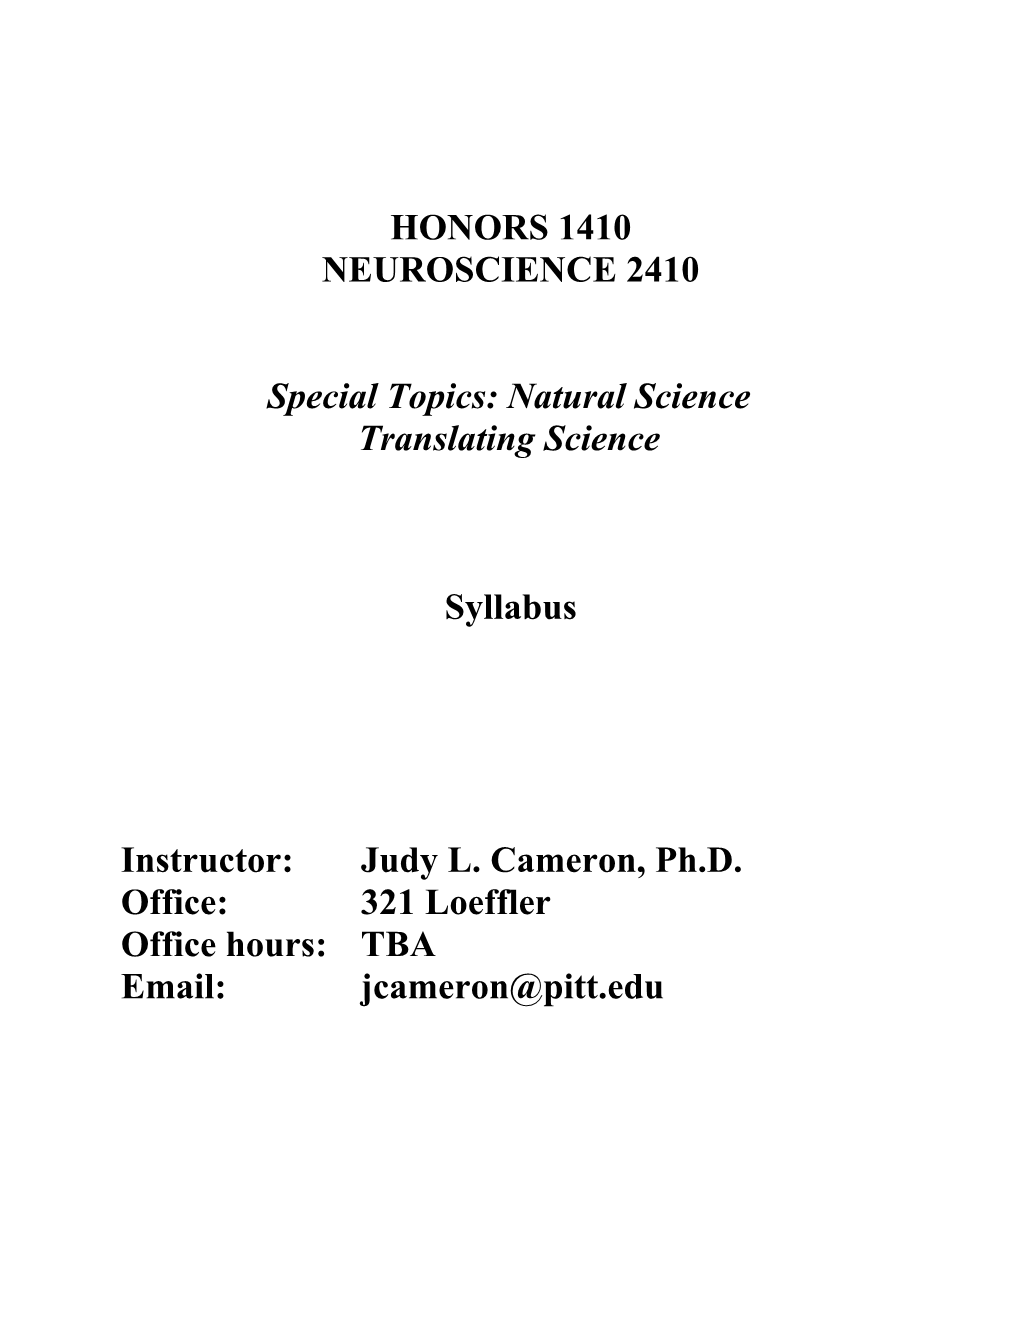 Special Topics: Natural Science